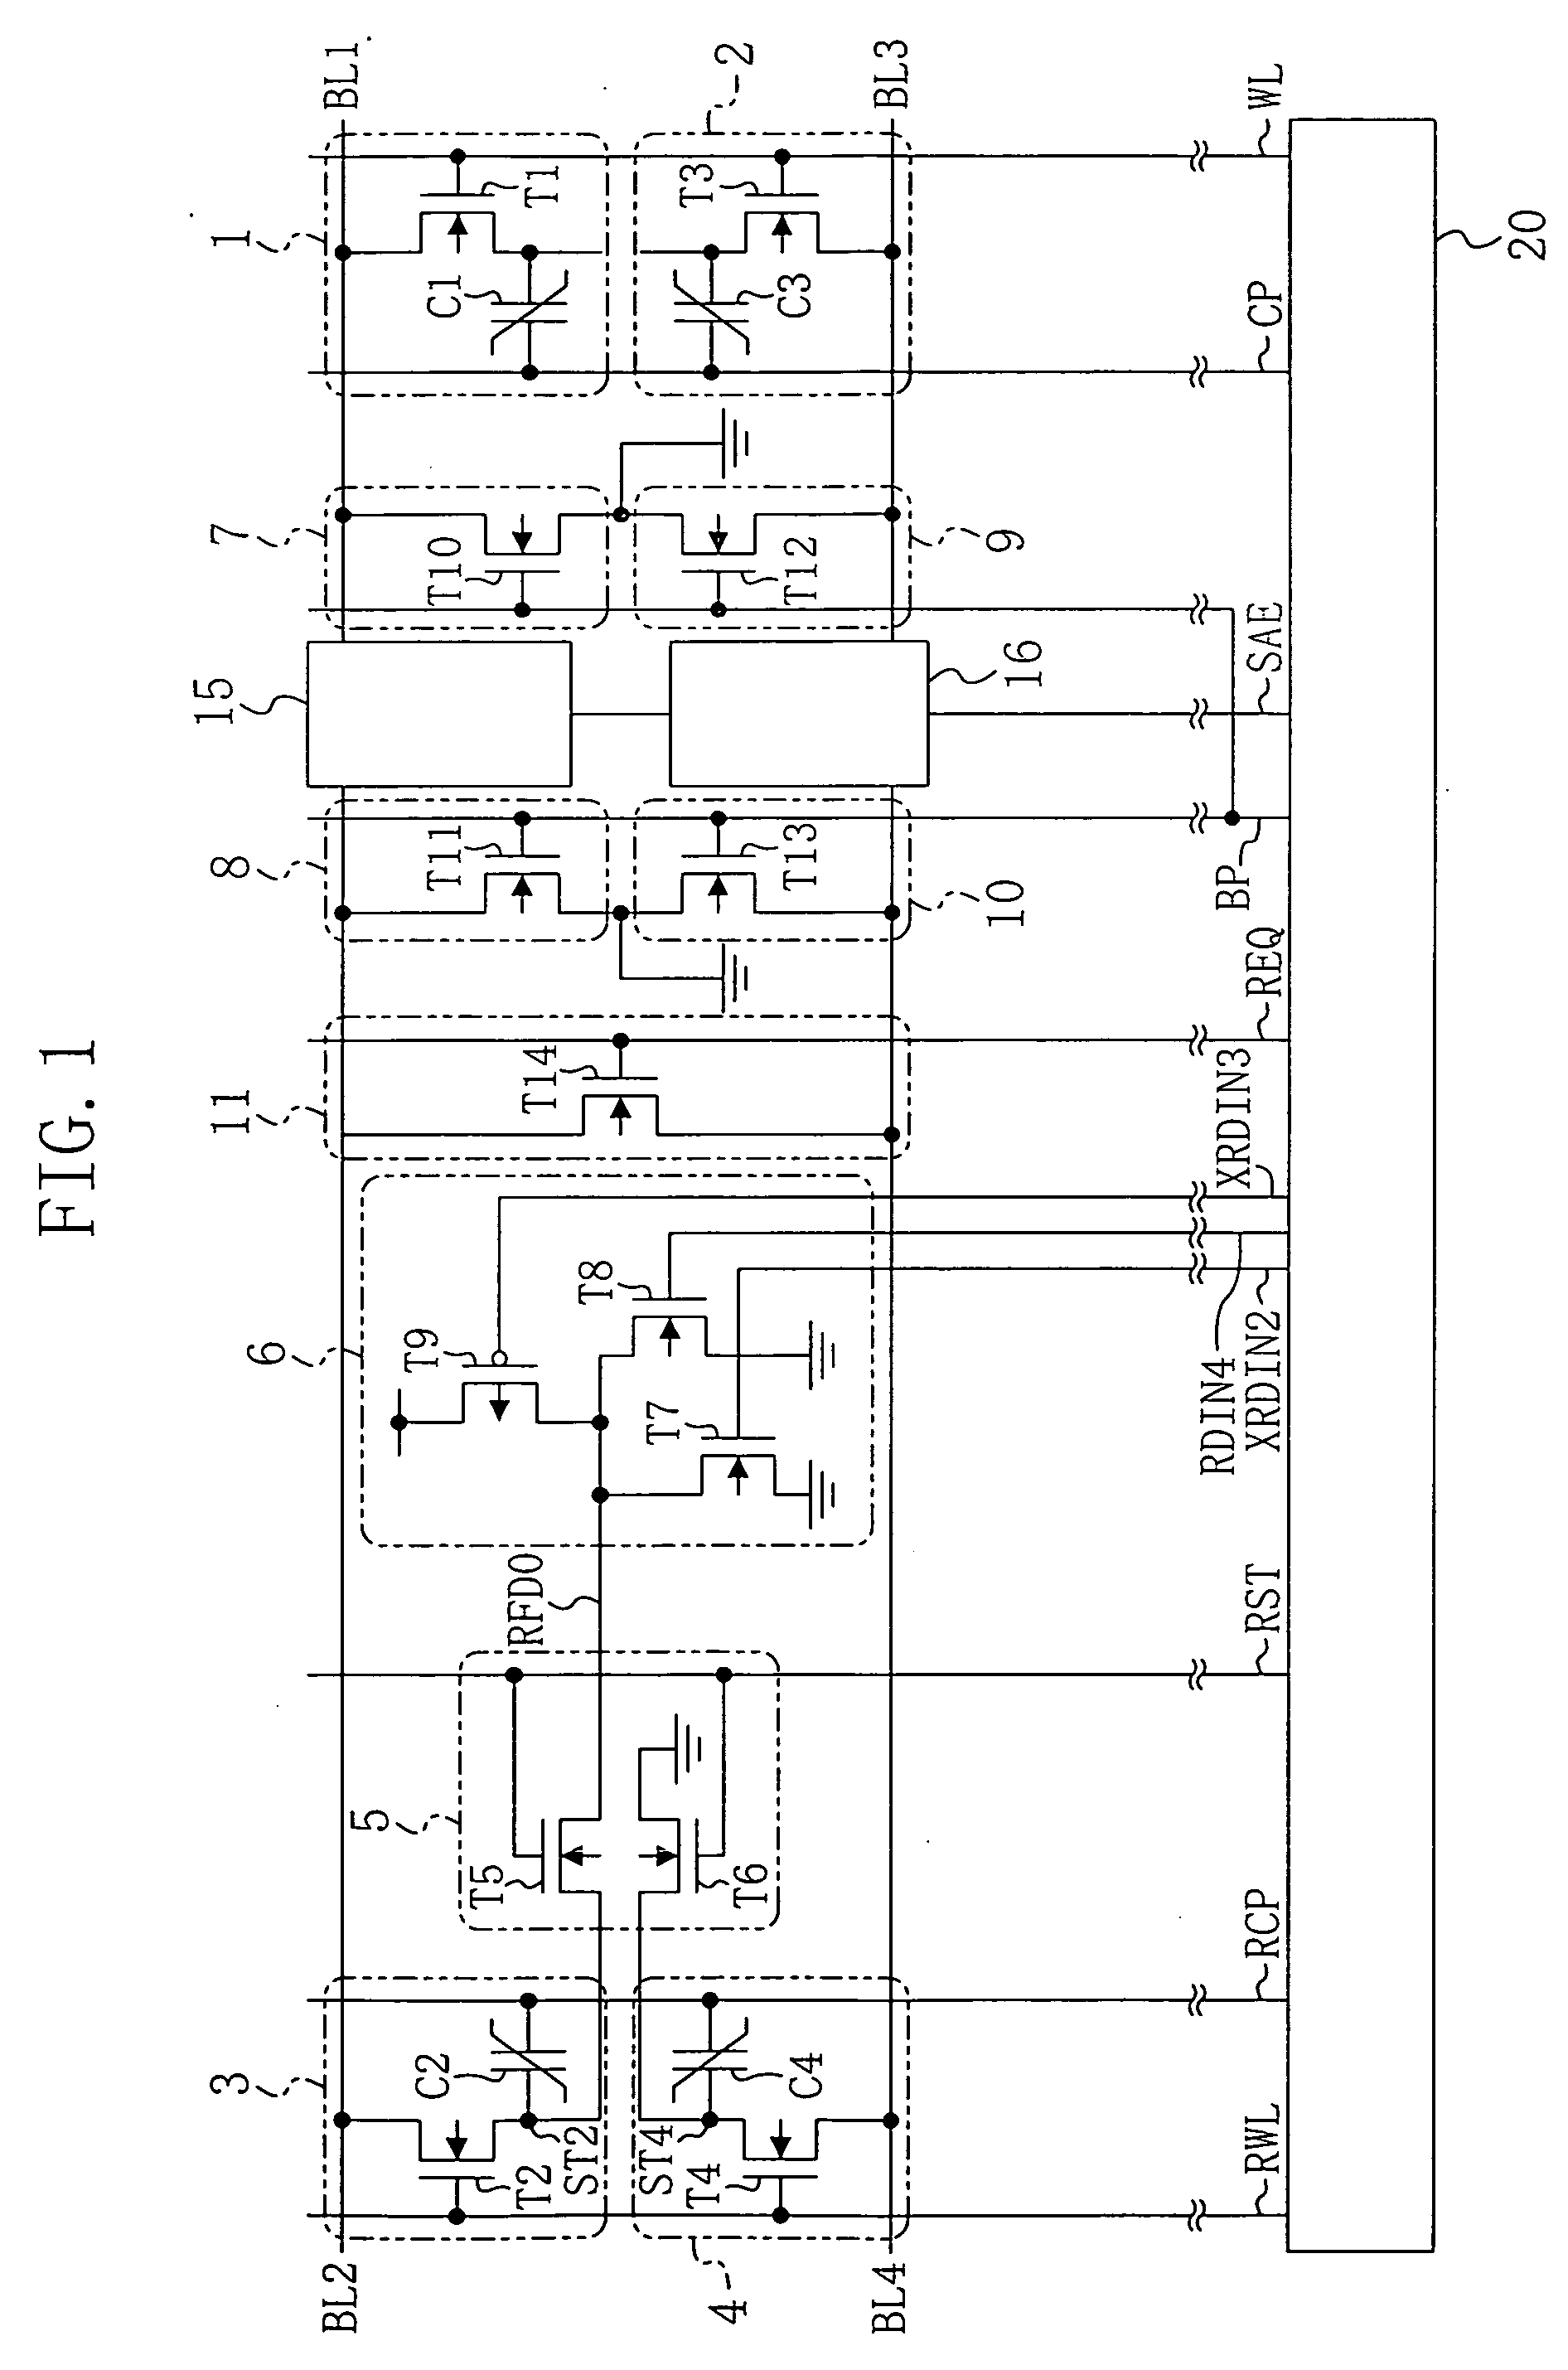 Ferroelectric memory and method for reading data from the ferroelectric memory